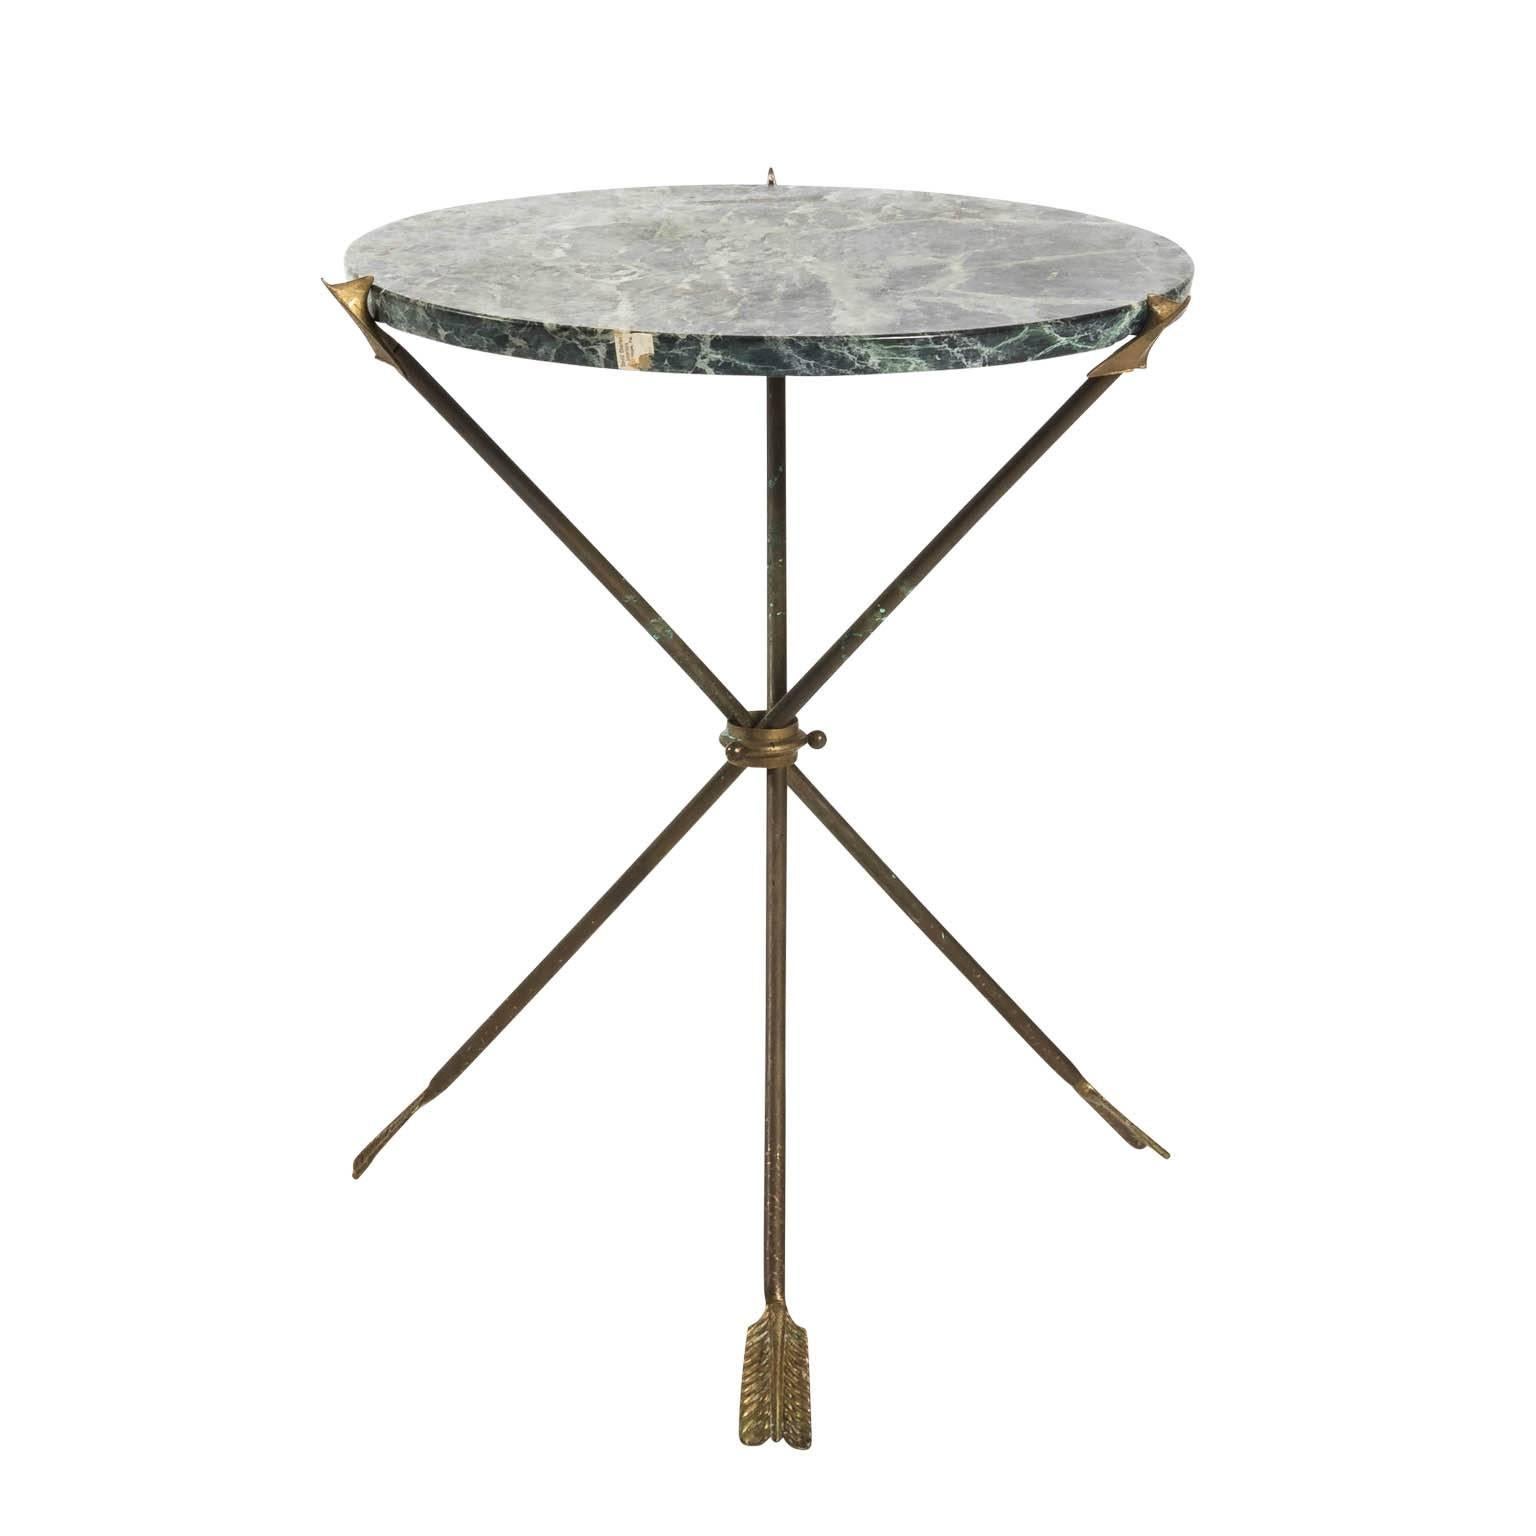 Mid-20th century side tables with round Verde Luna marble tops on a brass arrow shaped tripod bases in a manner of French Directoire style.
 